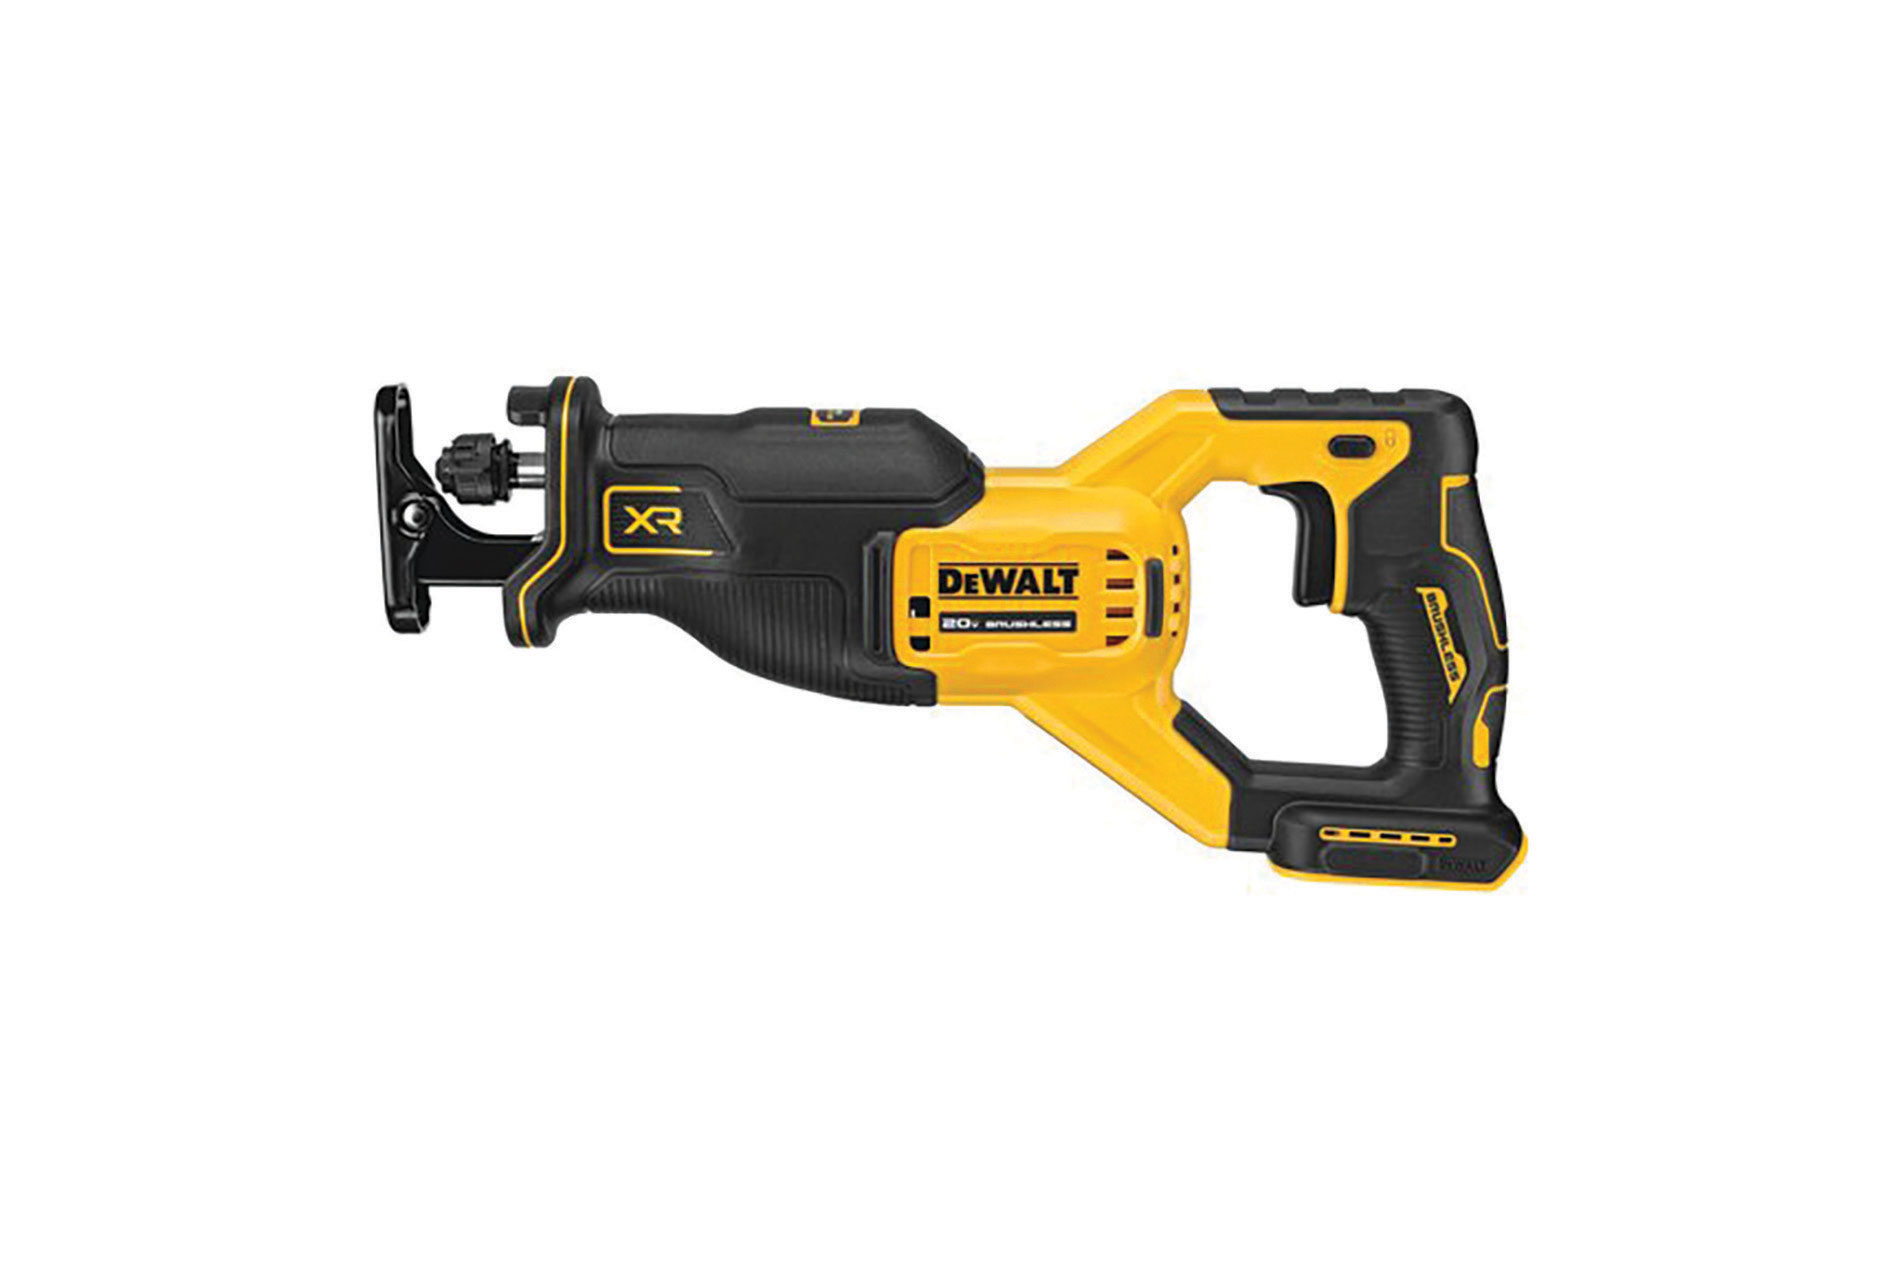 Black and yellow reciprocating saw. Image by DeWalt.